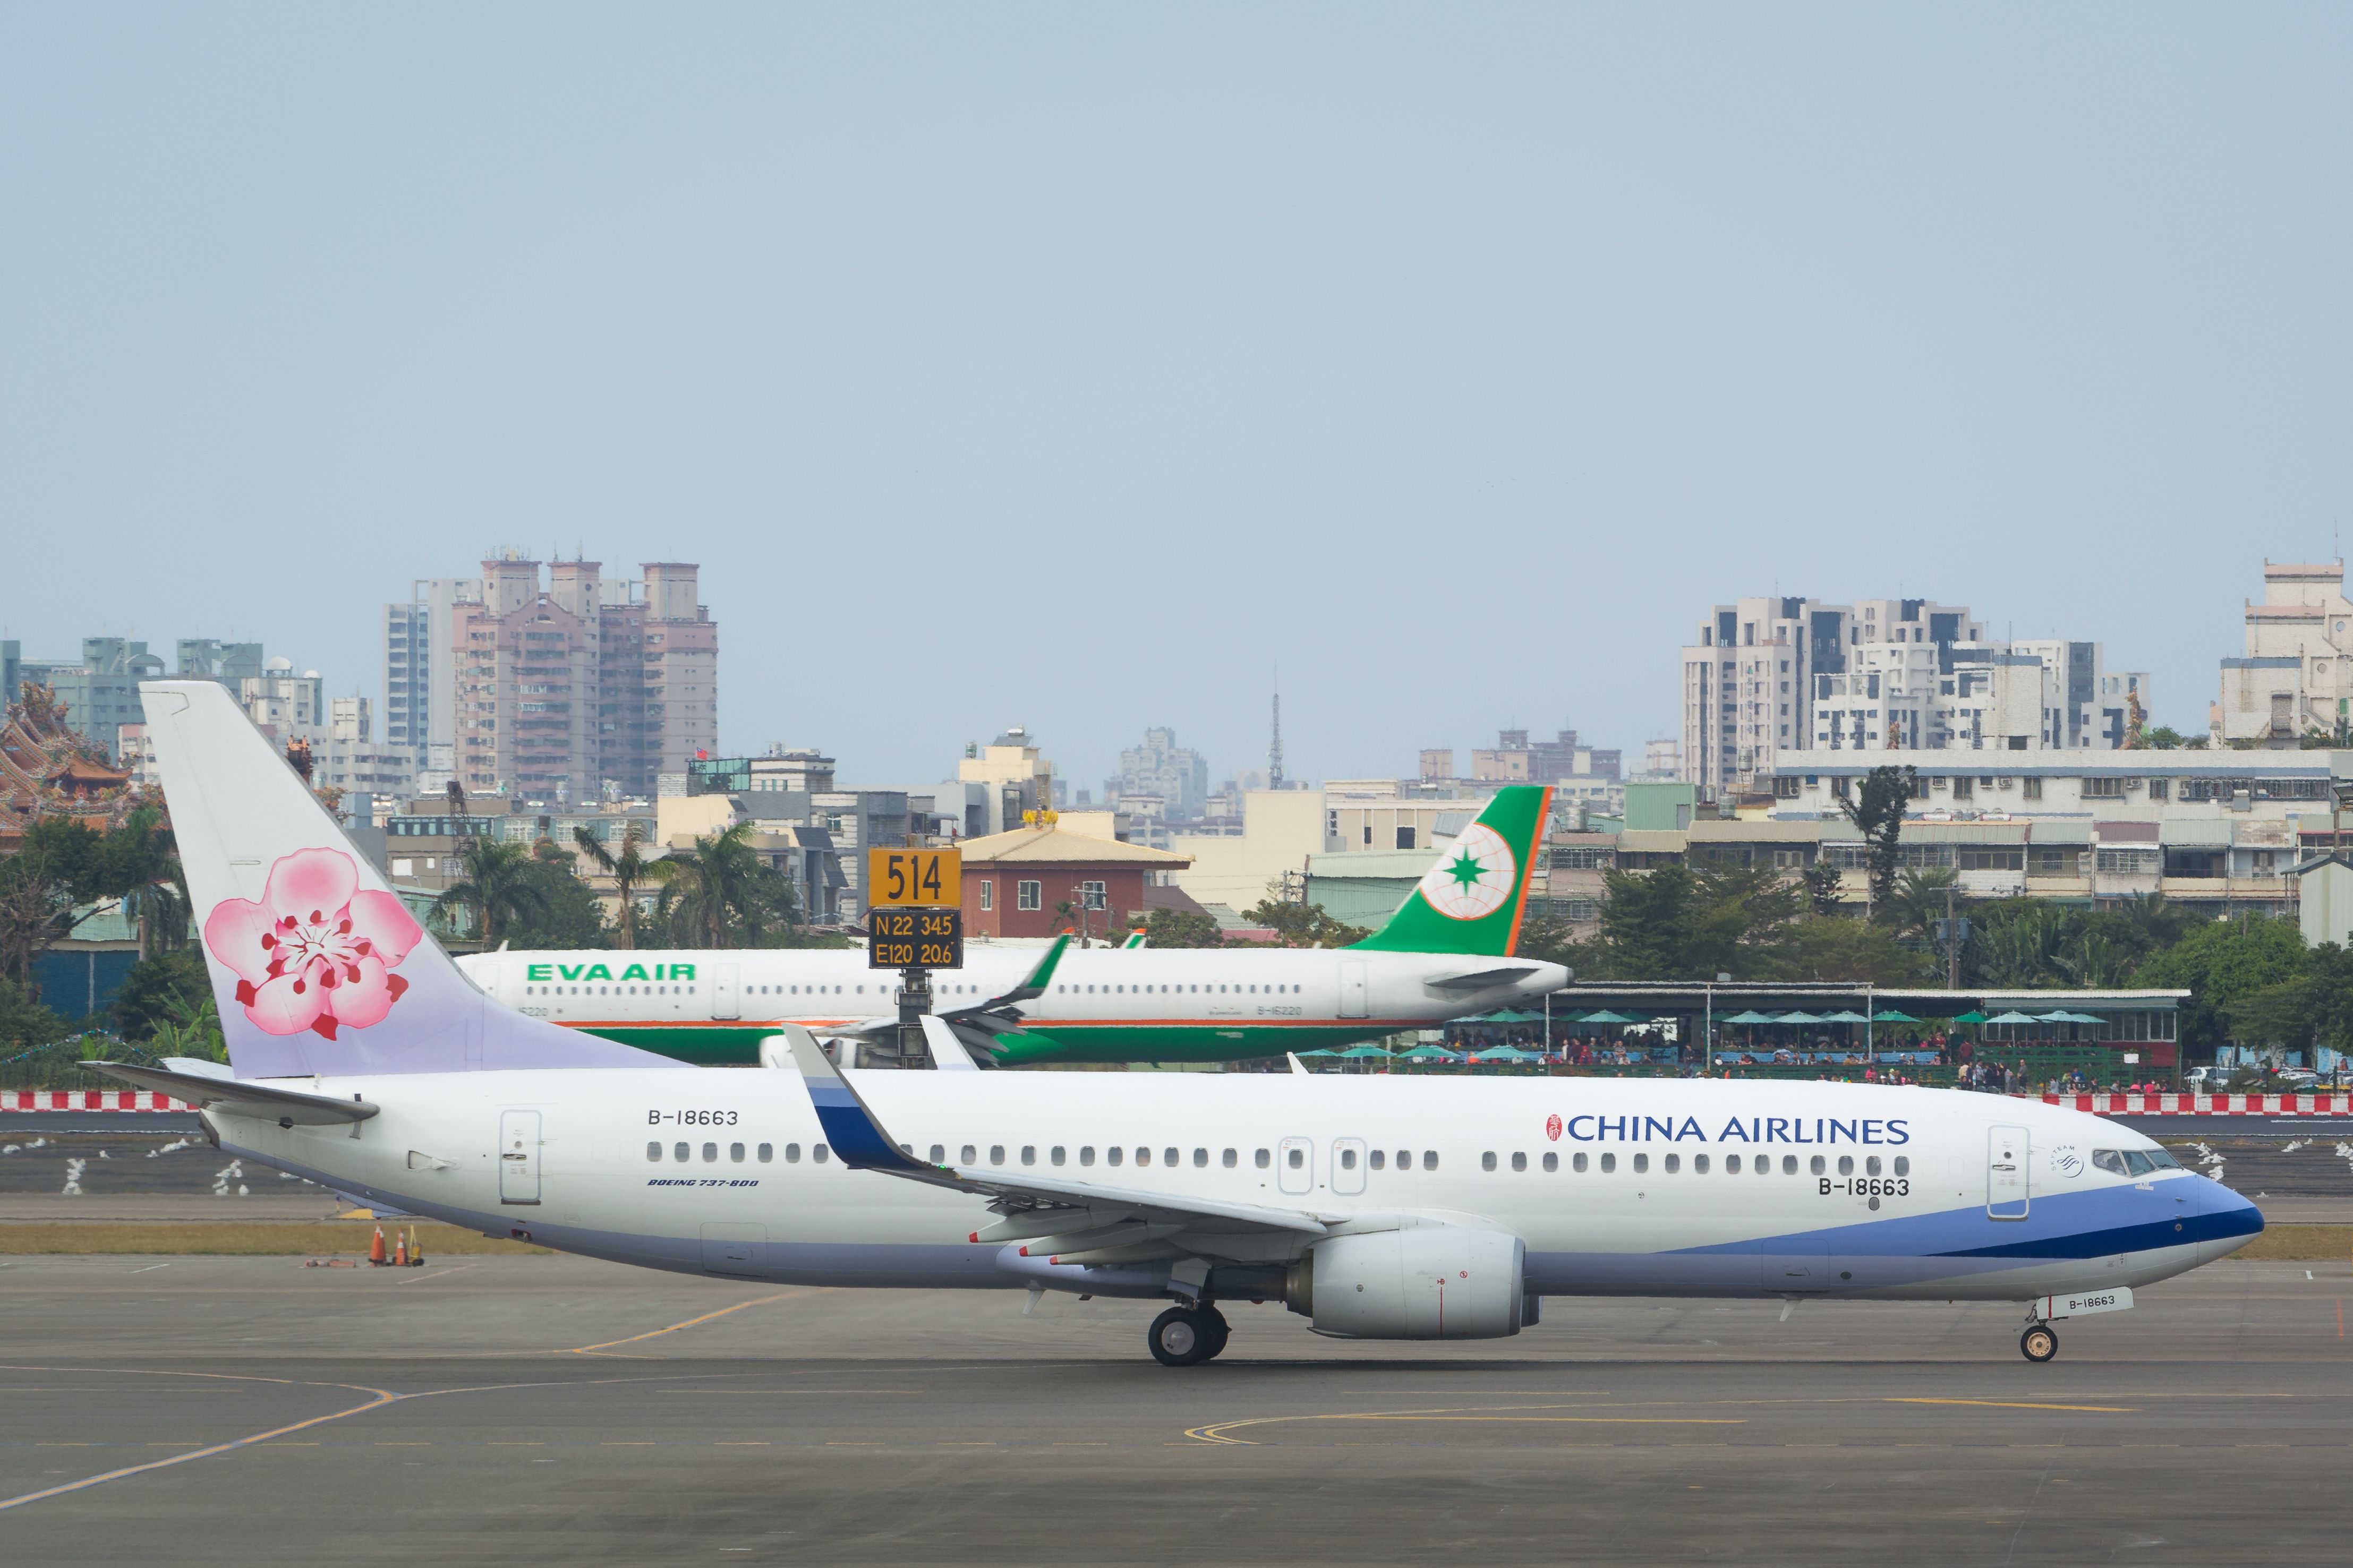 A China Airlines aircraft taxiing in front of an EVA Air aircraft.